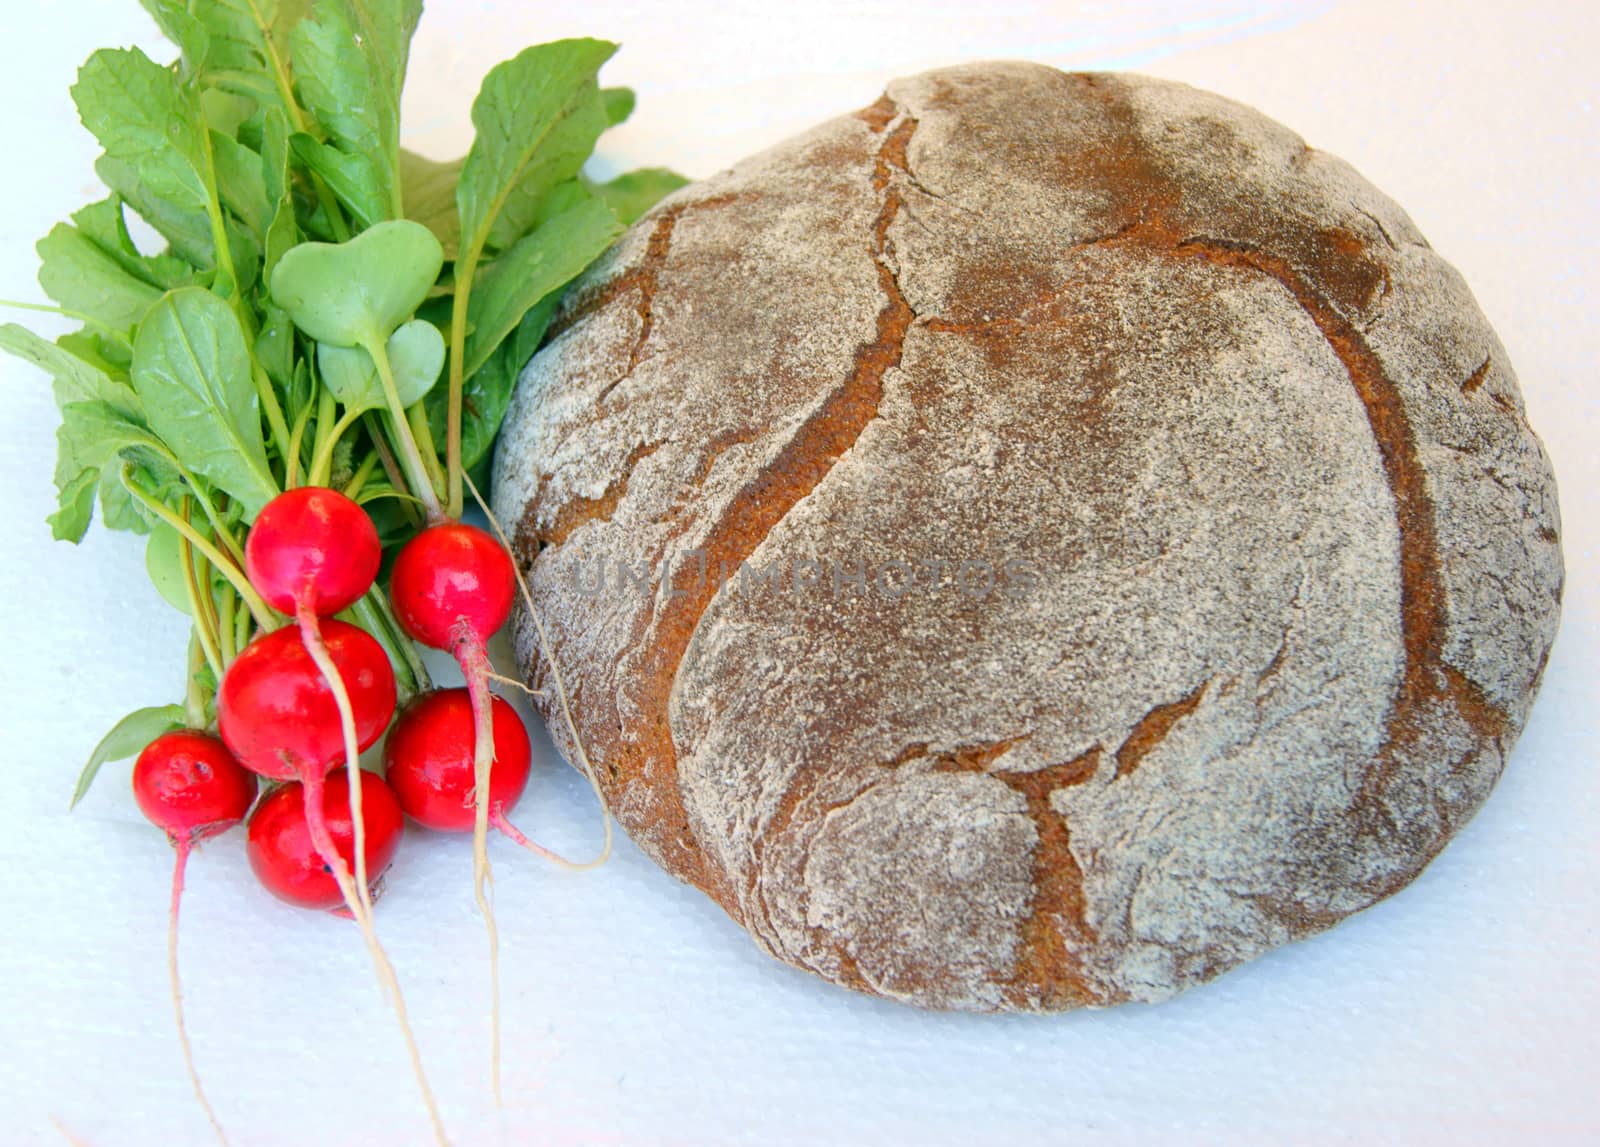 Bread and vegetables radish on white background is insulated